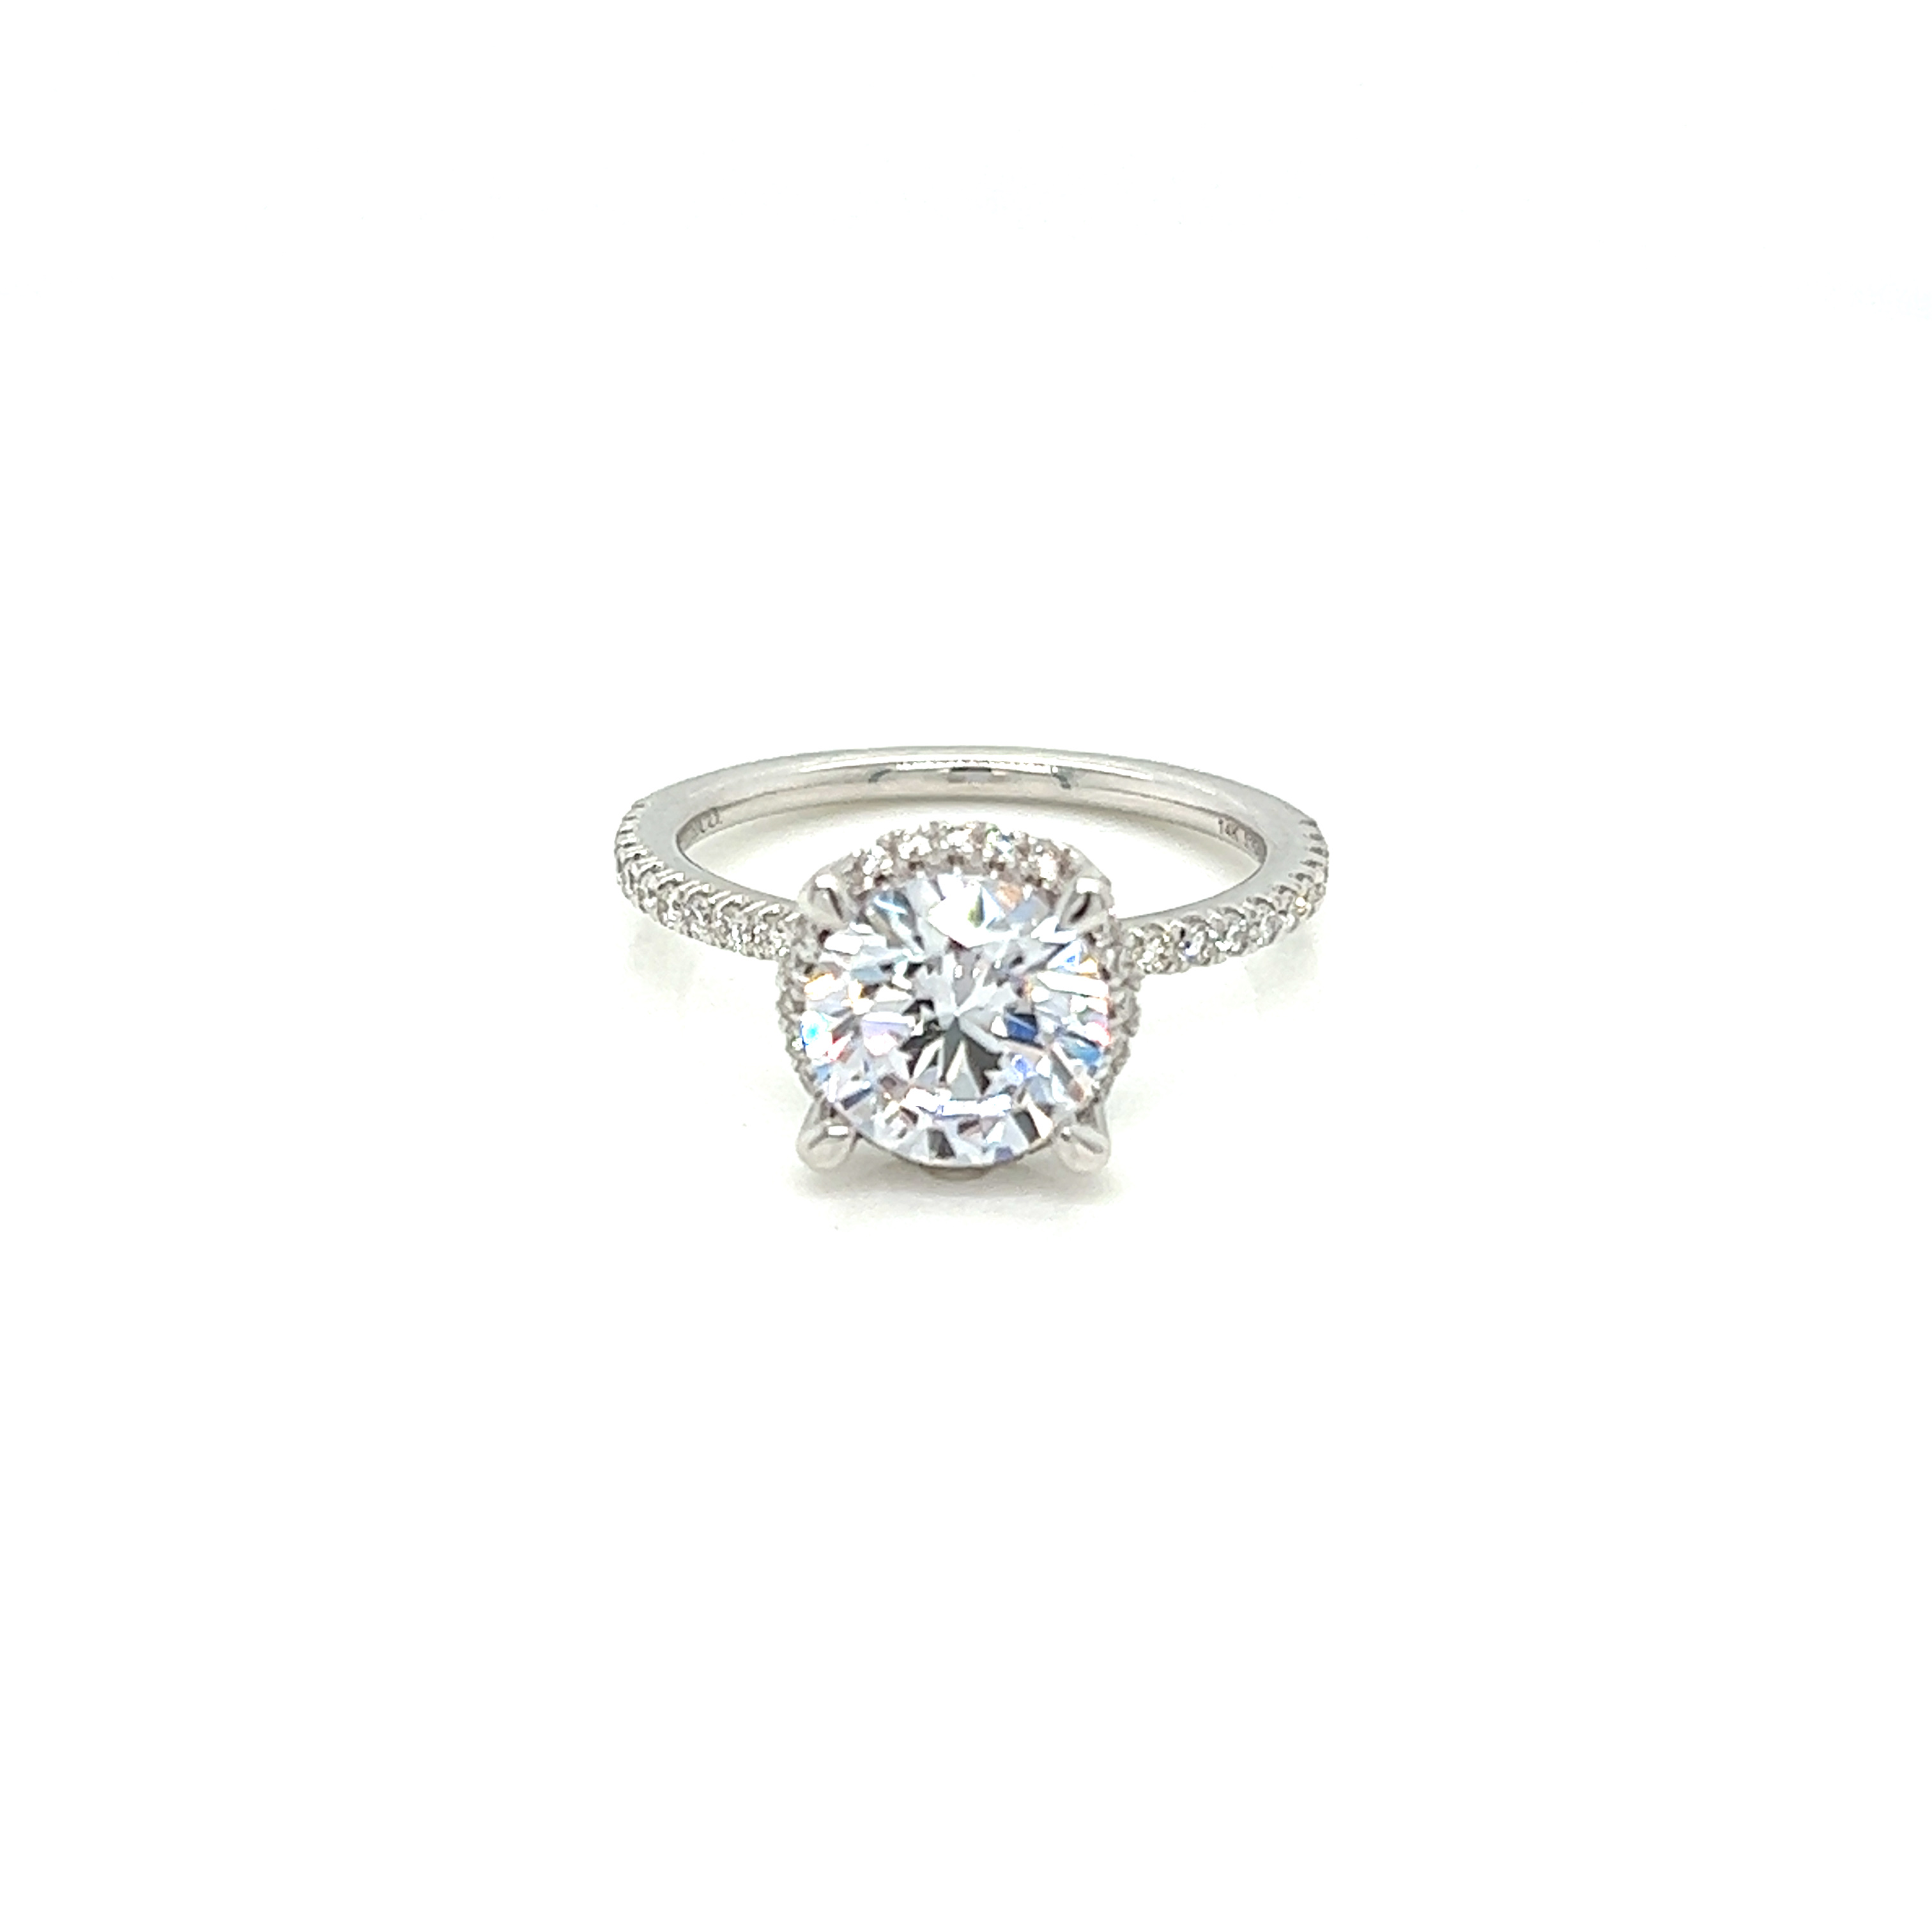 14 Karat white gold halo semi mount engagement ring Size 6.5 with41= 0.31 total weight round brilliant G VS Diamonds